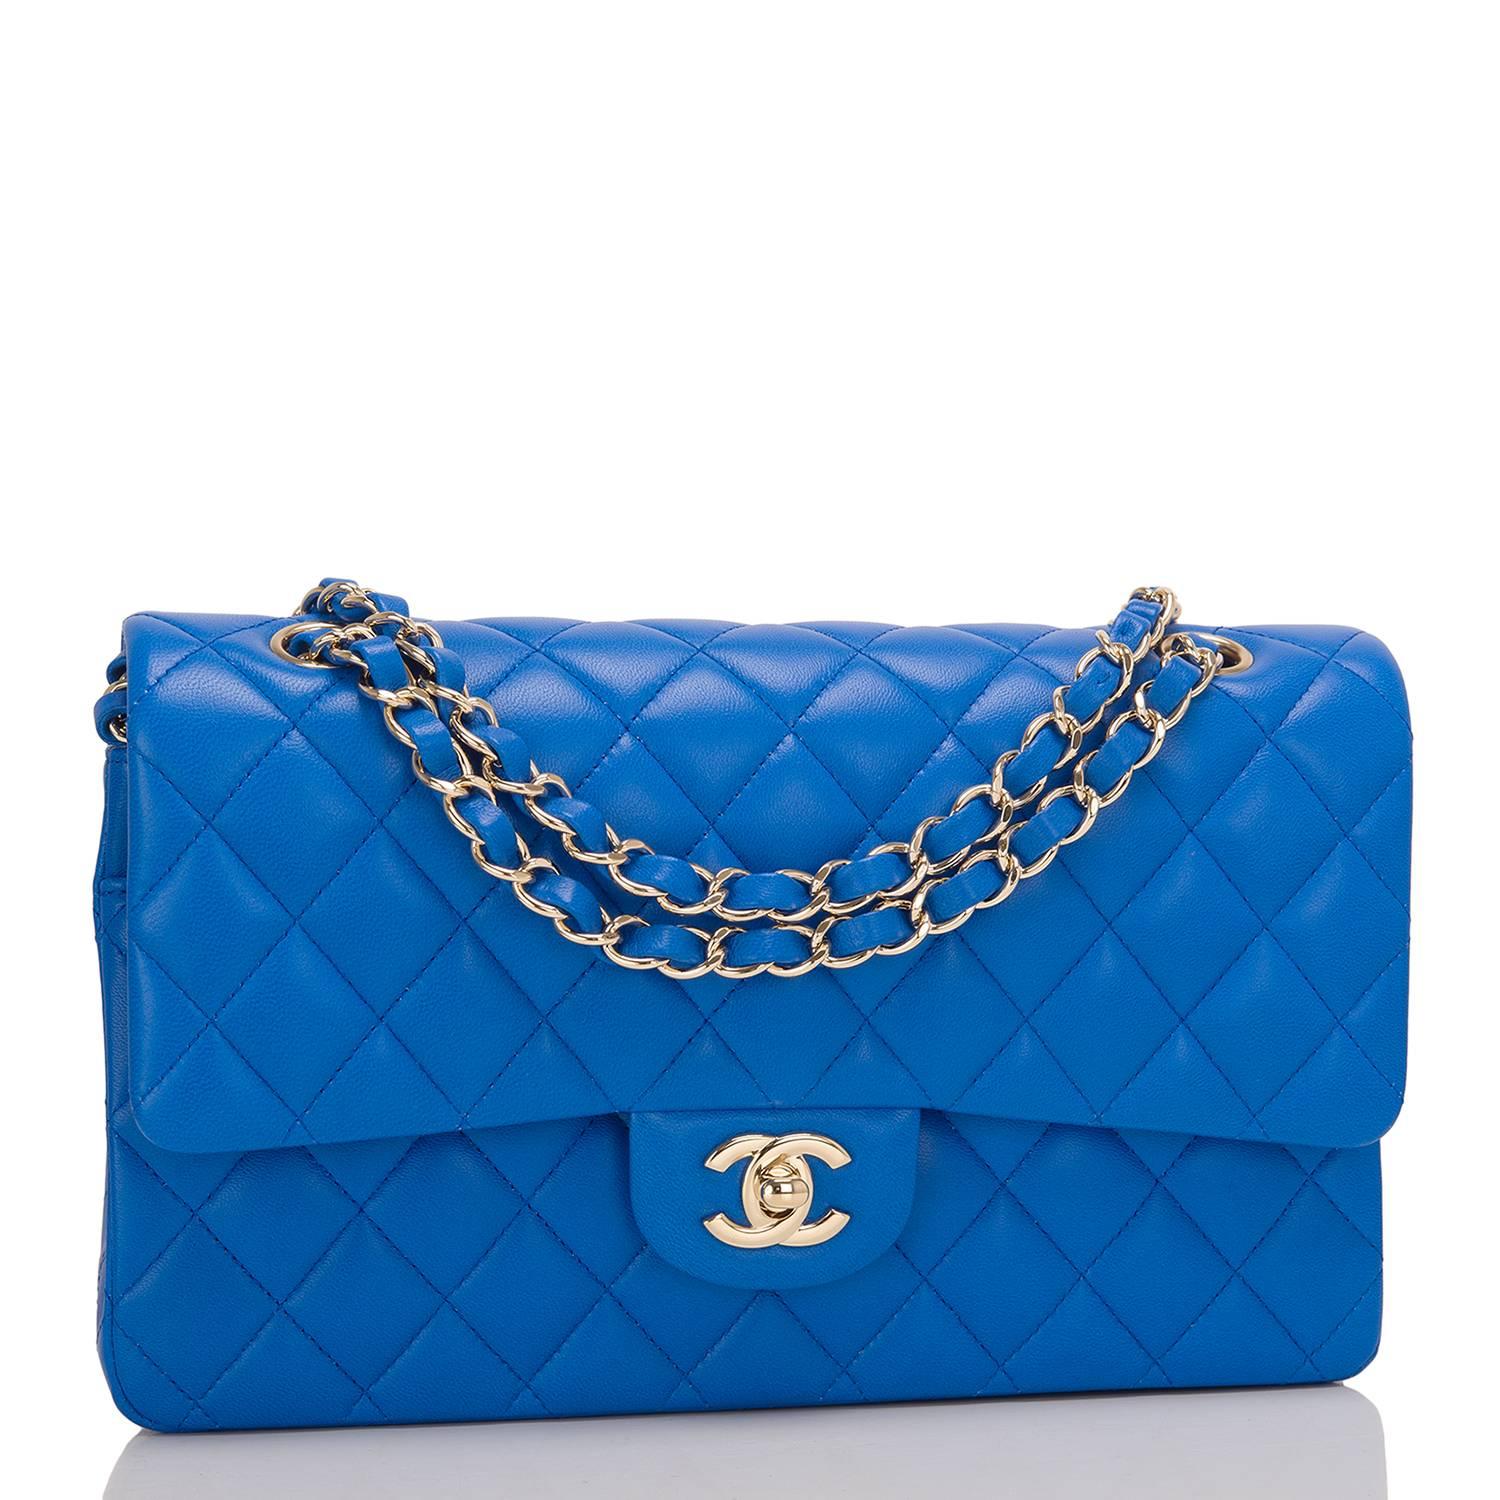 Chanel Medium Classic double flap bag of blue lambskin leather with light gold tone hardware.

This bag features a front flap with signature CC turnlock closure, a half moon back pocket, and an adjustable interwoven light gold tone chain link and